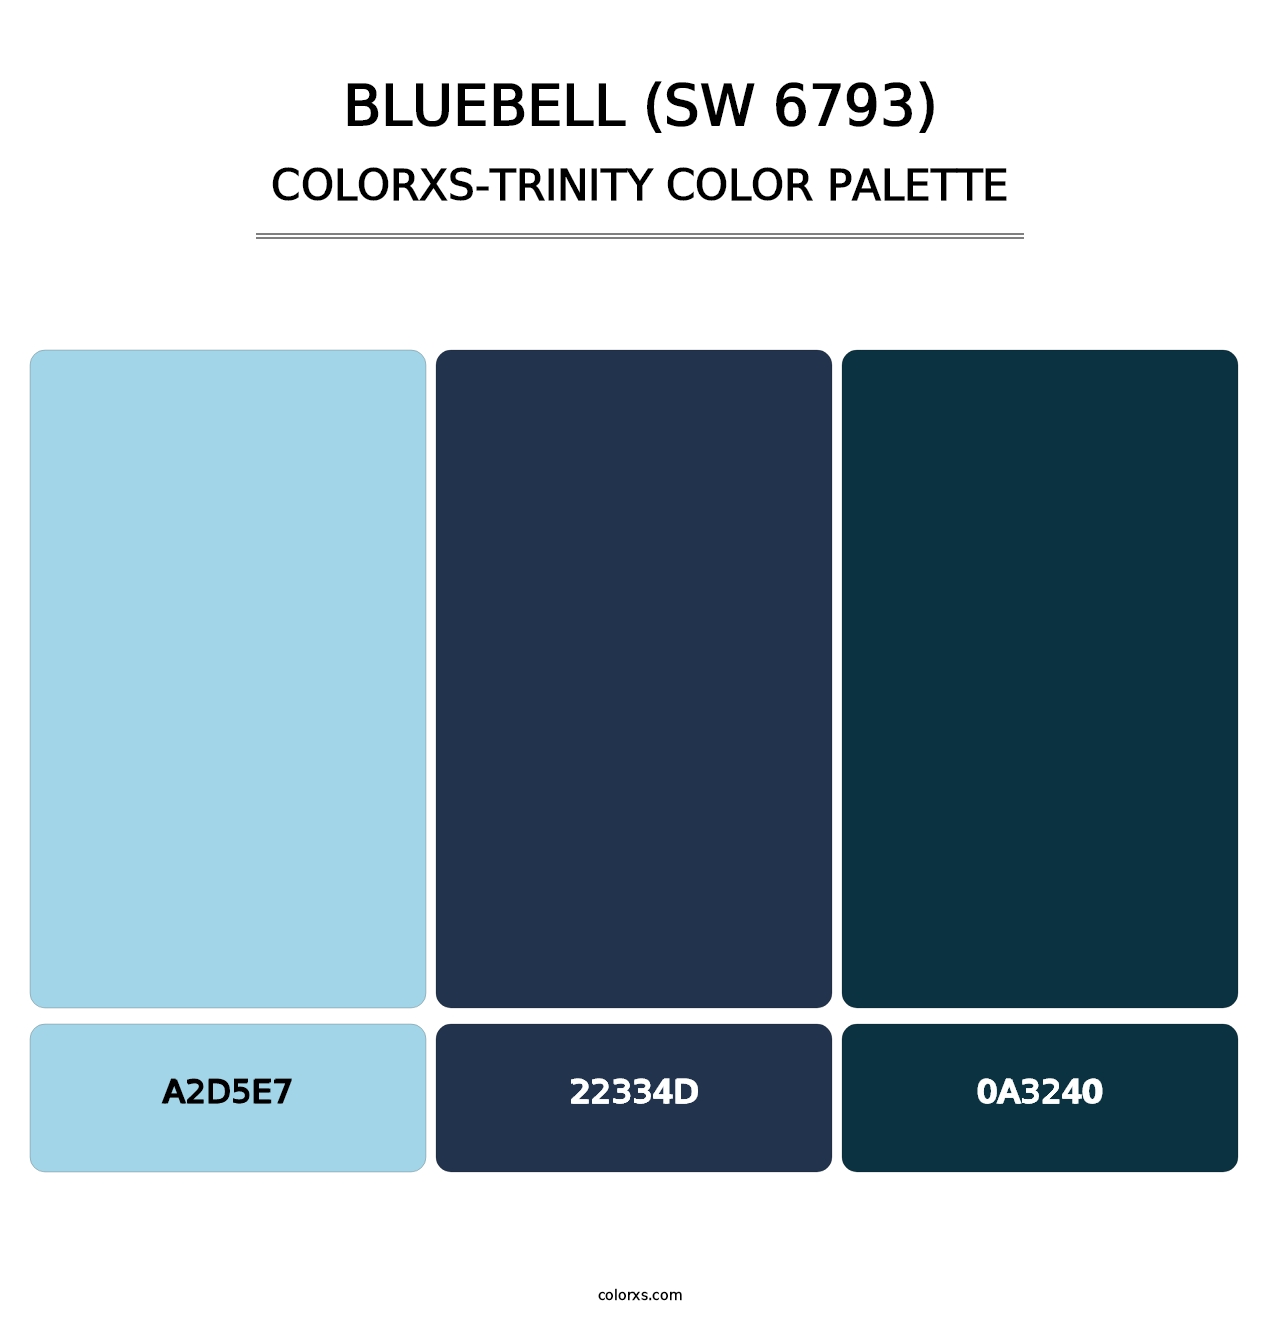 Bluebell (SW 6793) - Colorxs Trinity Palette